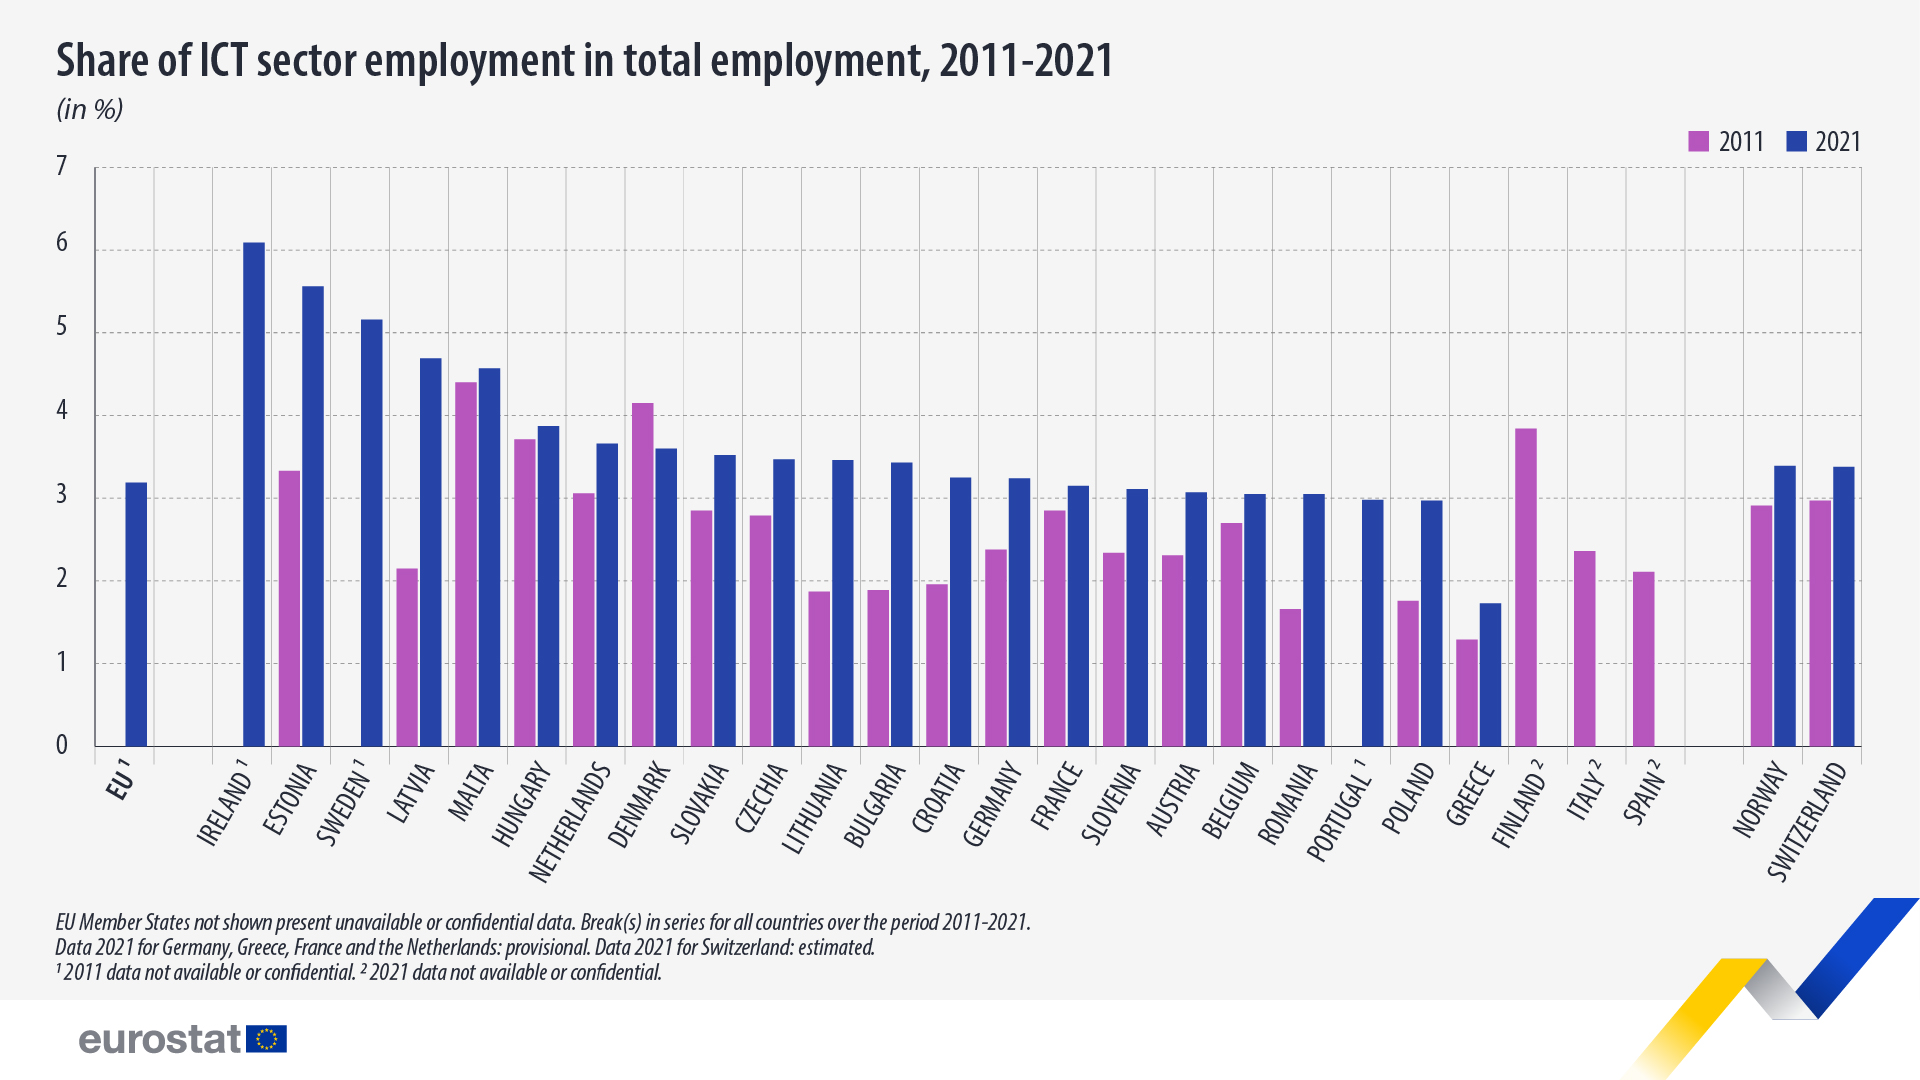 Share of ICT sector employment in total employment, 2011-2021. For more information, click dataset below.